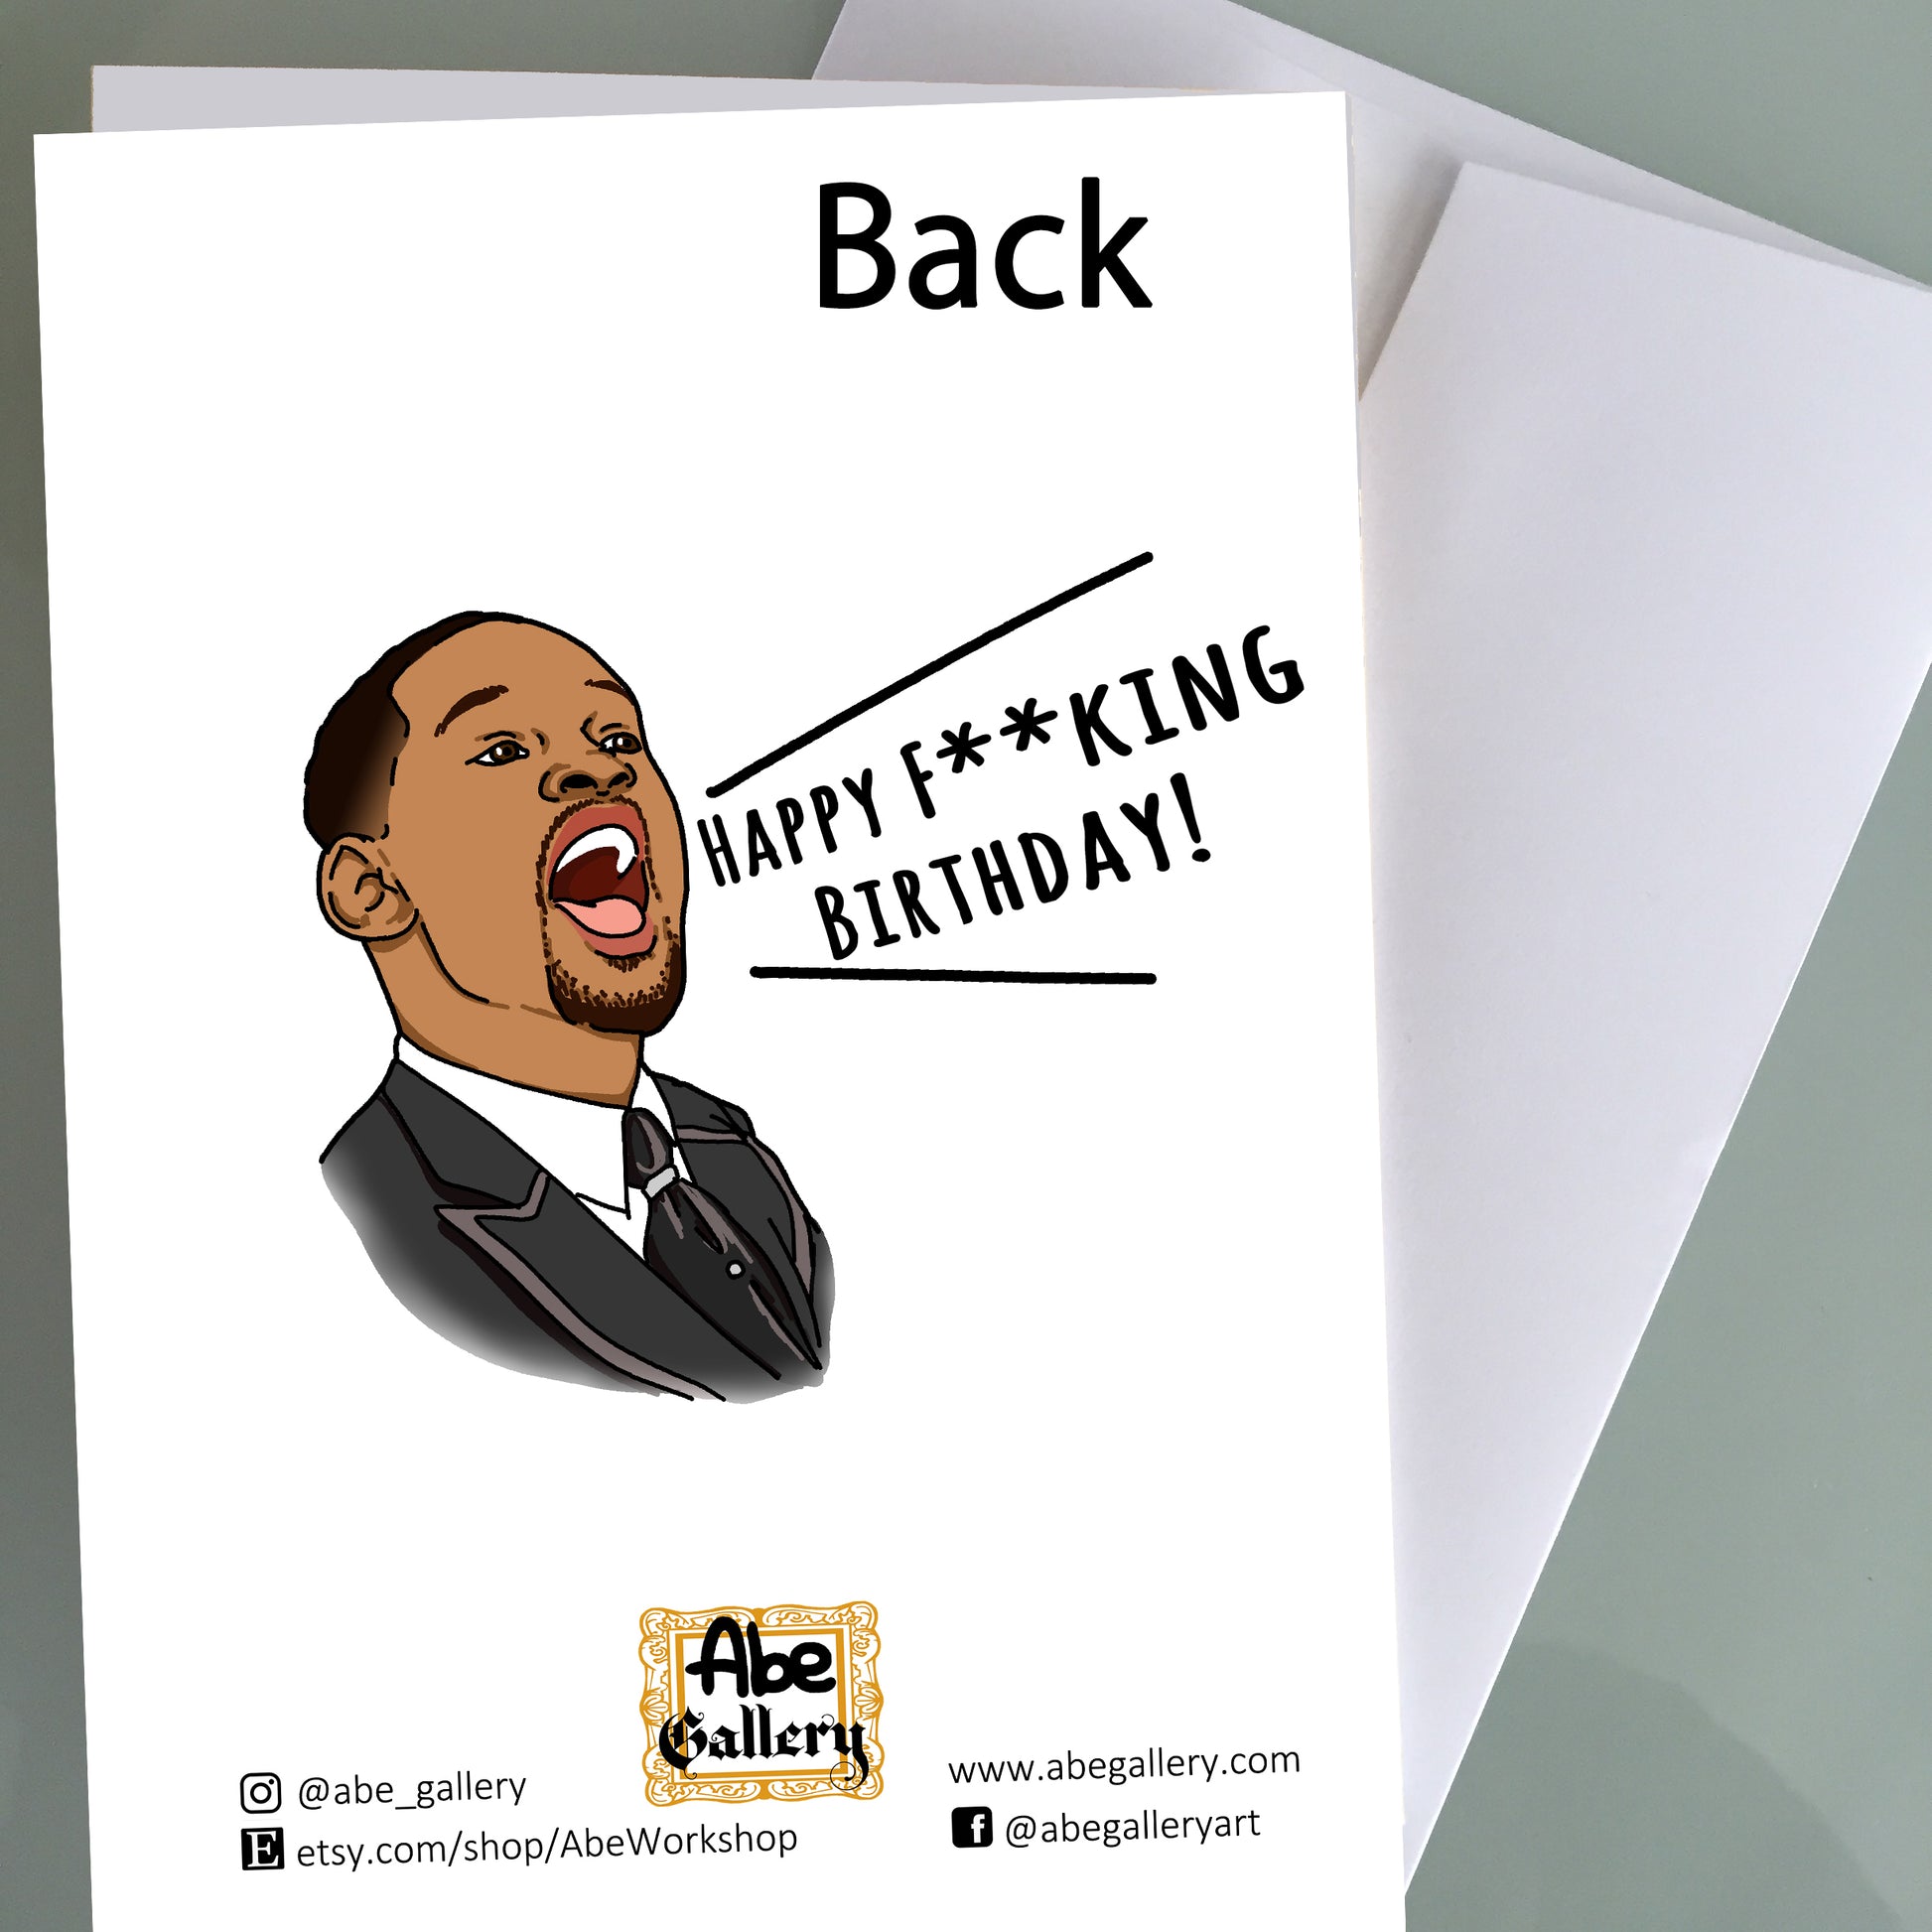 Will Smith Slap Funny Birthday Card Chris Rock Meme (Instant Download) 